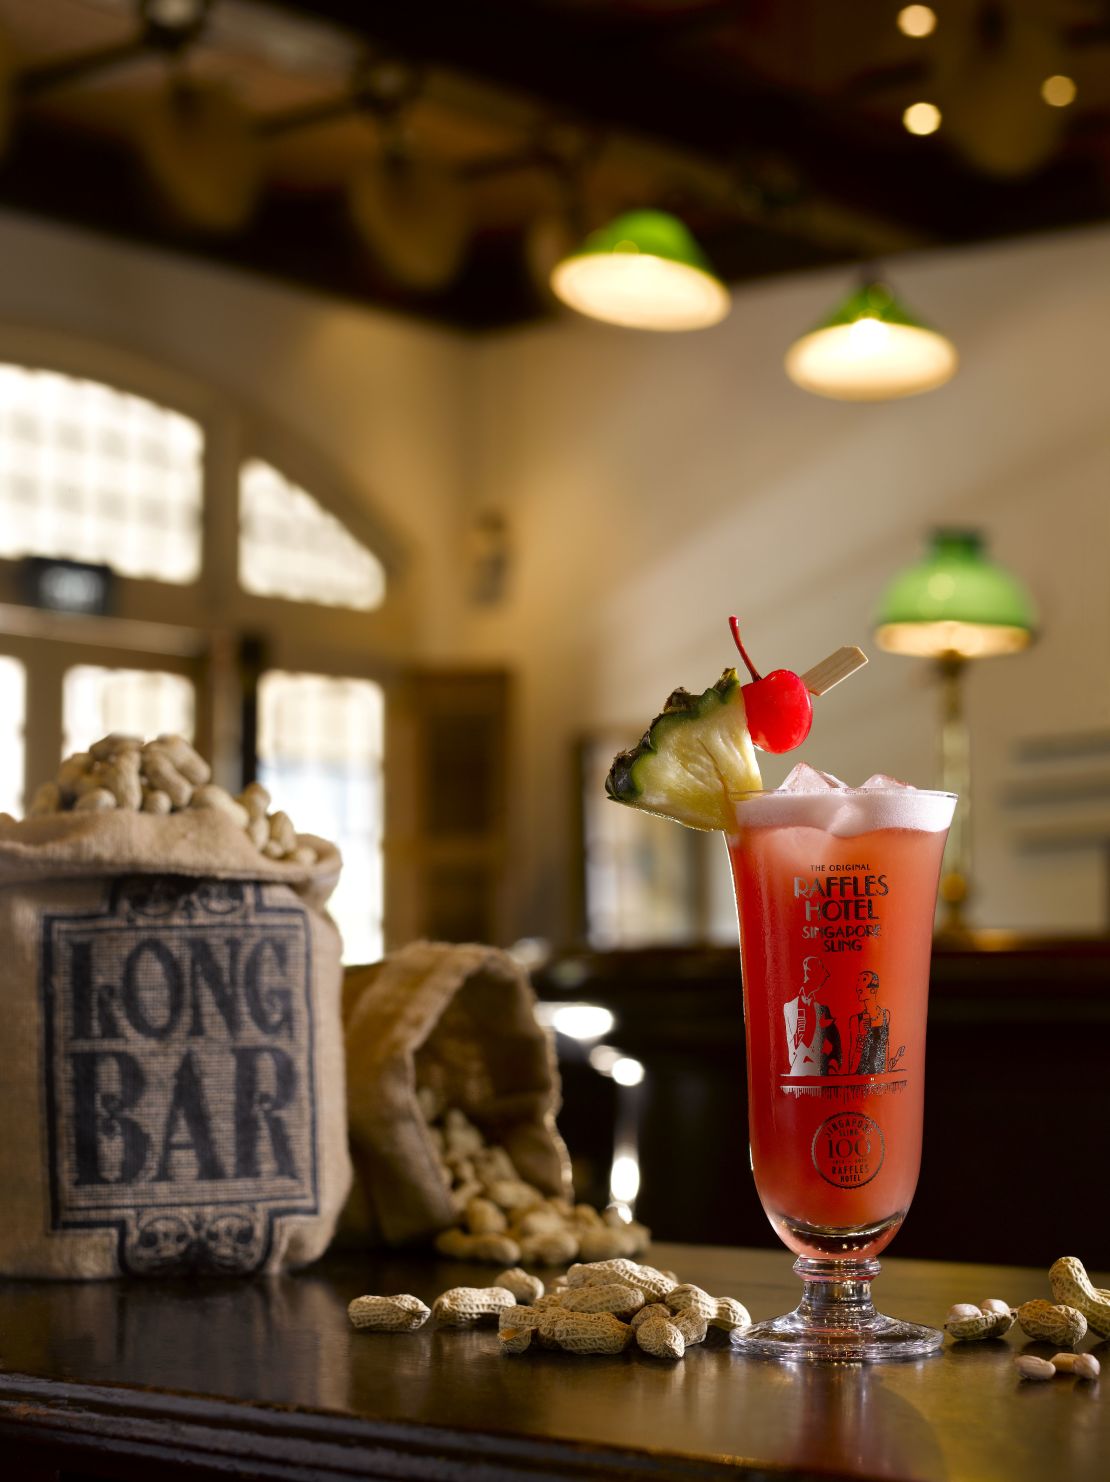 Where else is the spirit and history of a city captured in a cocktail?